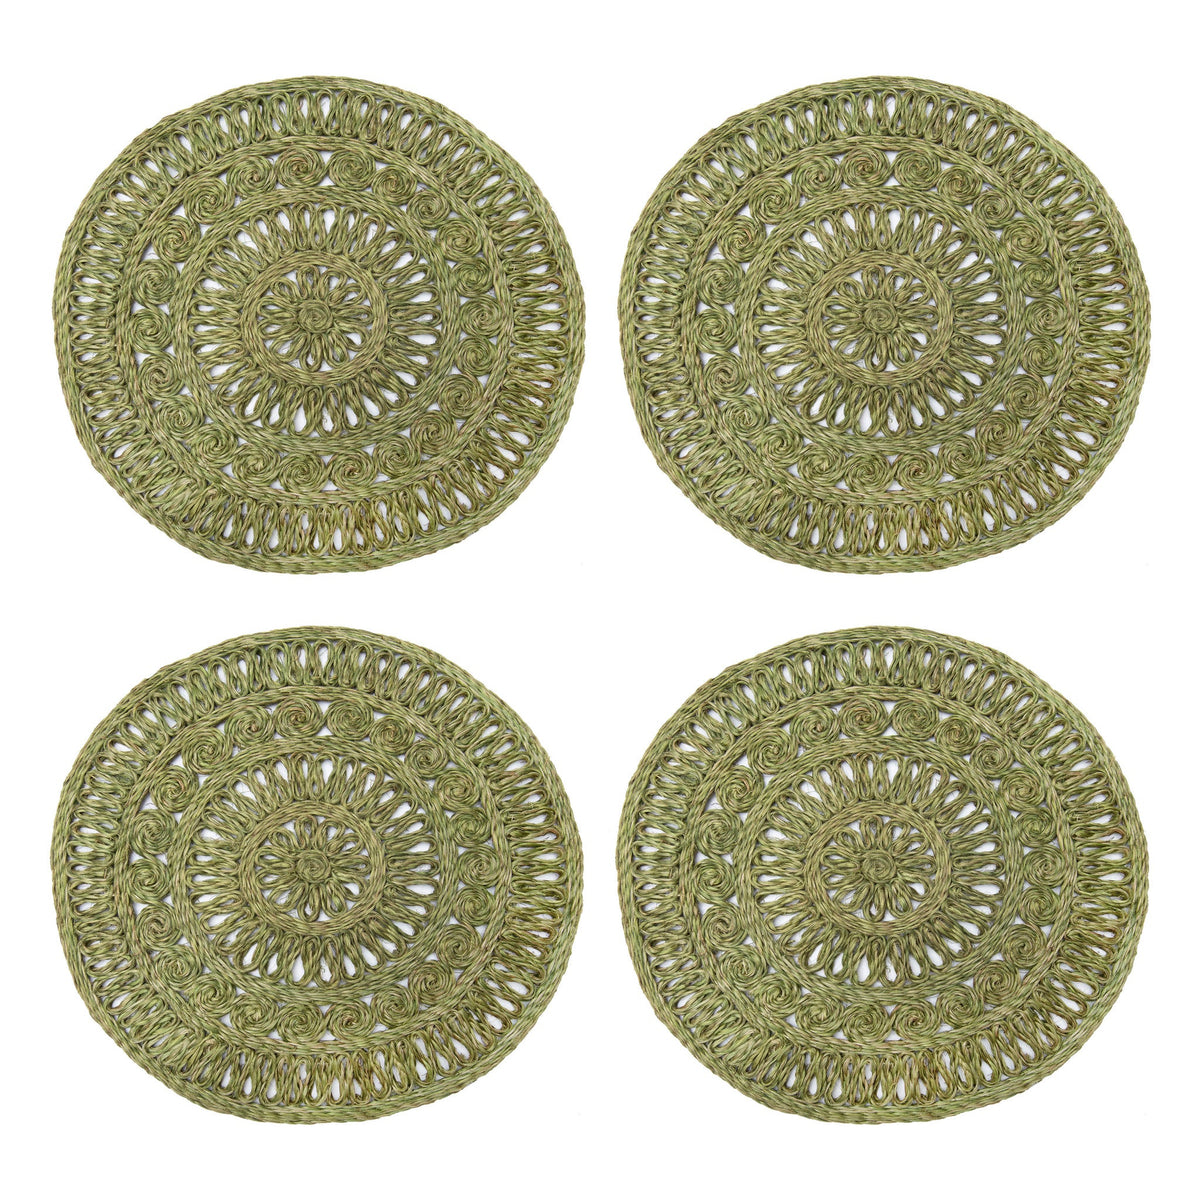 Circolo Abaca Round Placemat in in Olive Green, Set of 4